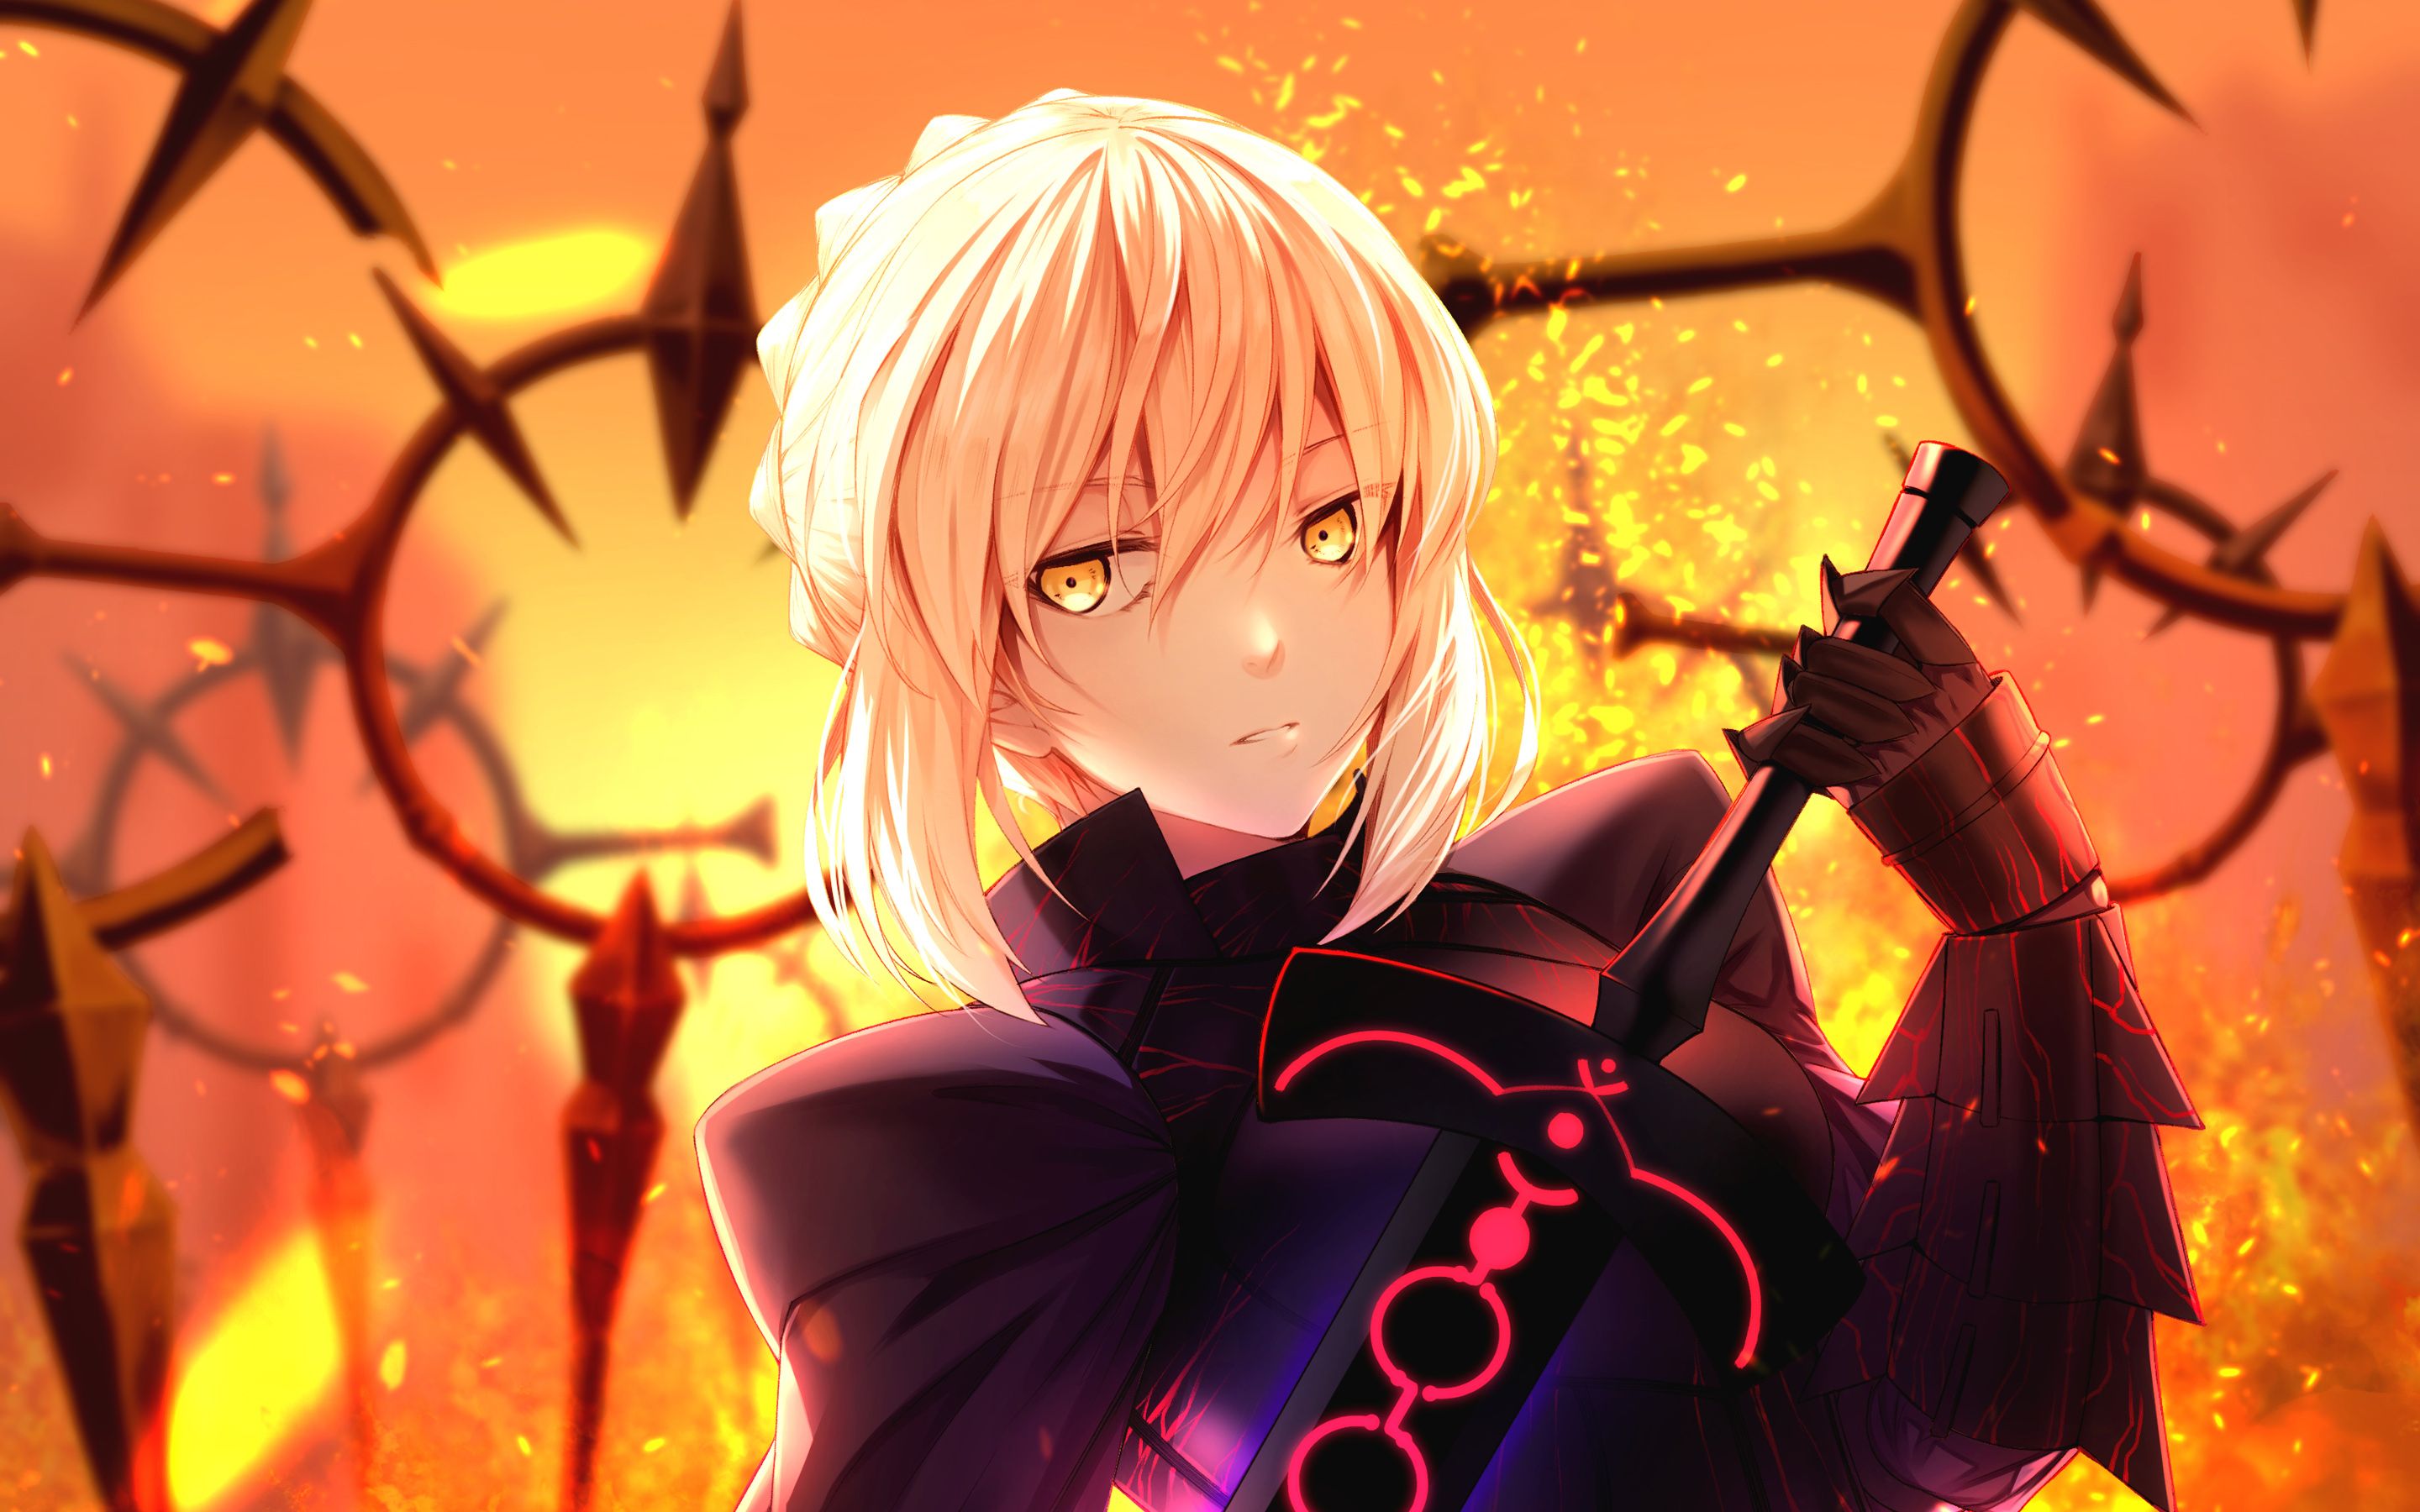 Download Wallpaper Saber, Art, Fate Prototype, Manga, Saber Alter, TYPE MOON, Saber Alternative For Desktop With Resolution 2880x1800. High Quality HD Picture Wallpaper